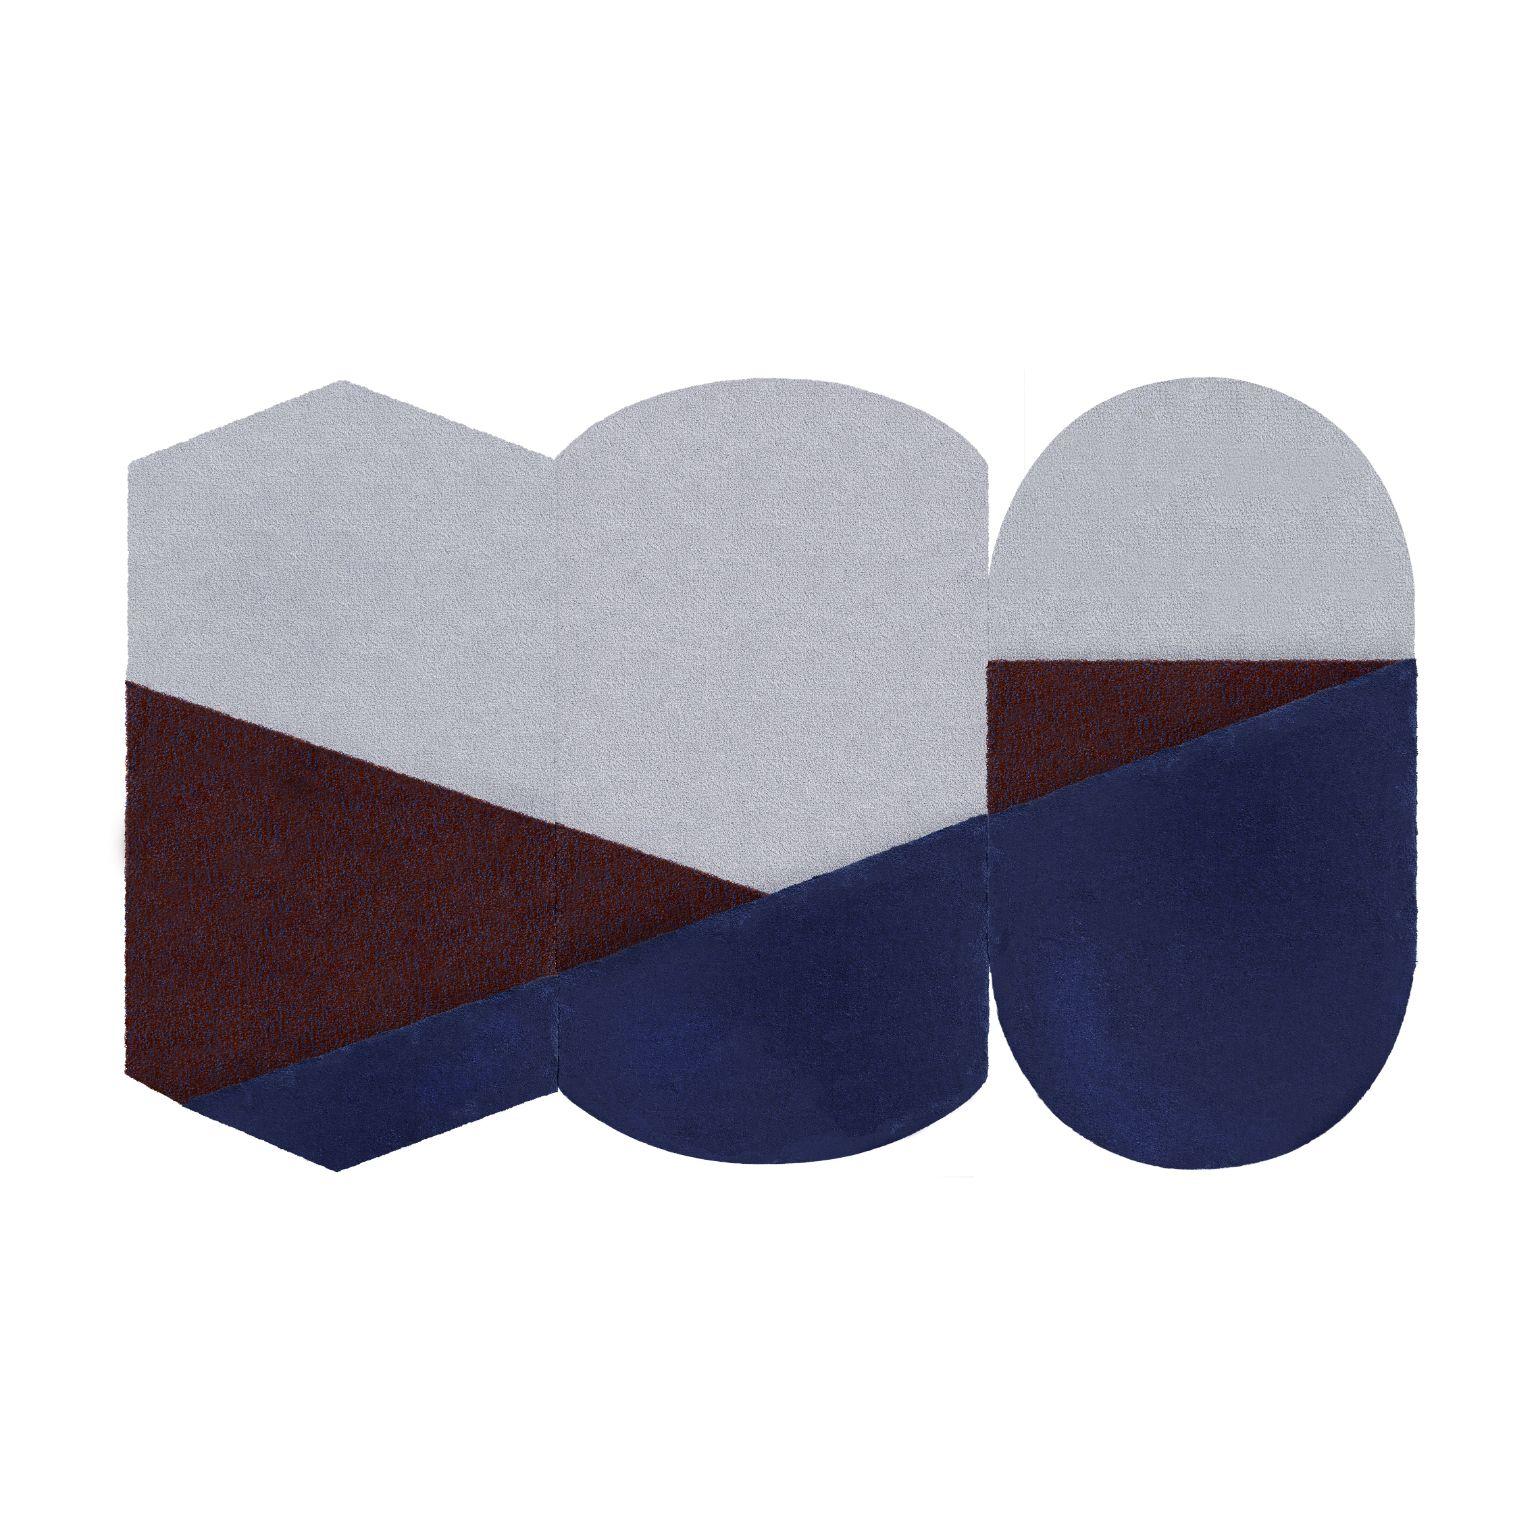 Small Blue Oci Triptych rug by Seraina Lareida
Dimensions: 210 x 1300 cm
Materials: 100% New Zealand top-quality wool.
Available in sizes Medium or Large. Also available in colors: Brick/Pink, Yellow/Gray, Green/Brick, Blue/Brick. Customizable